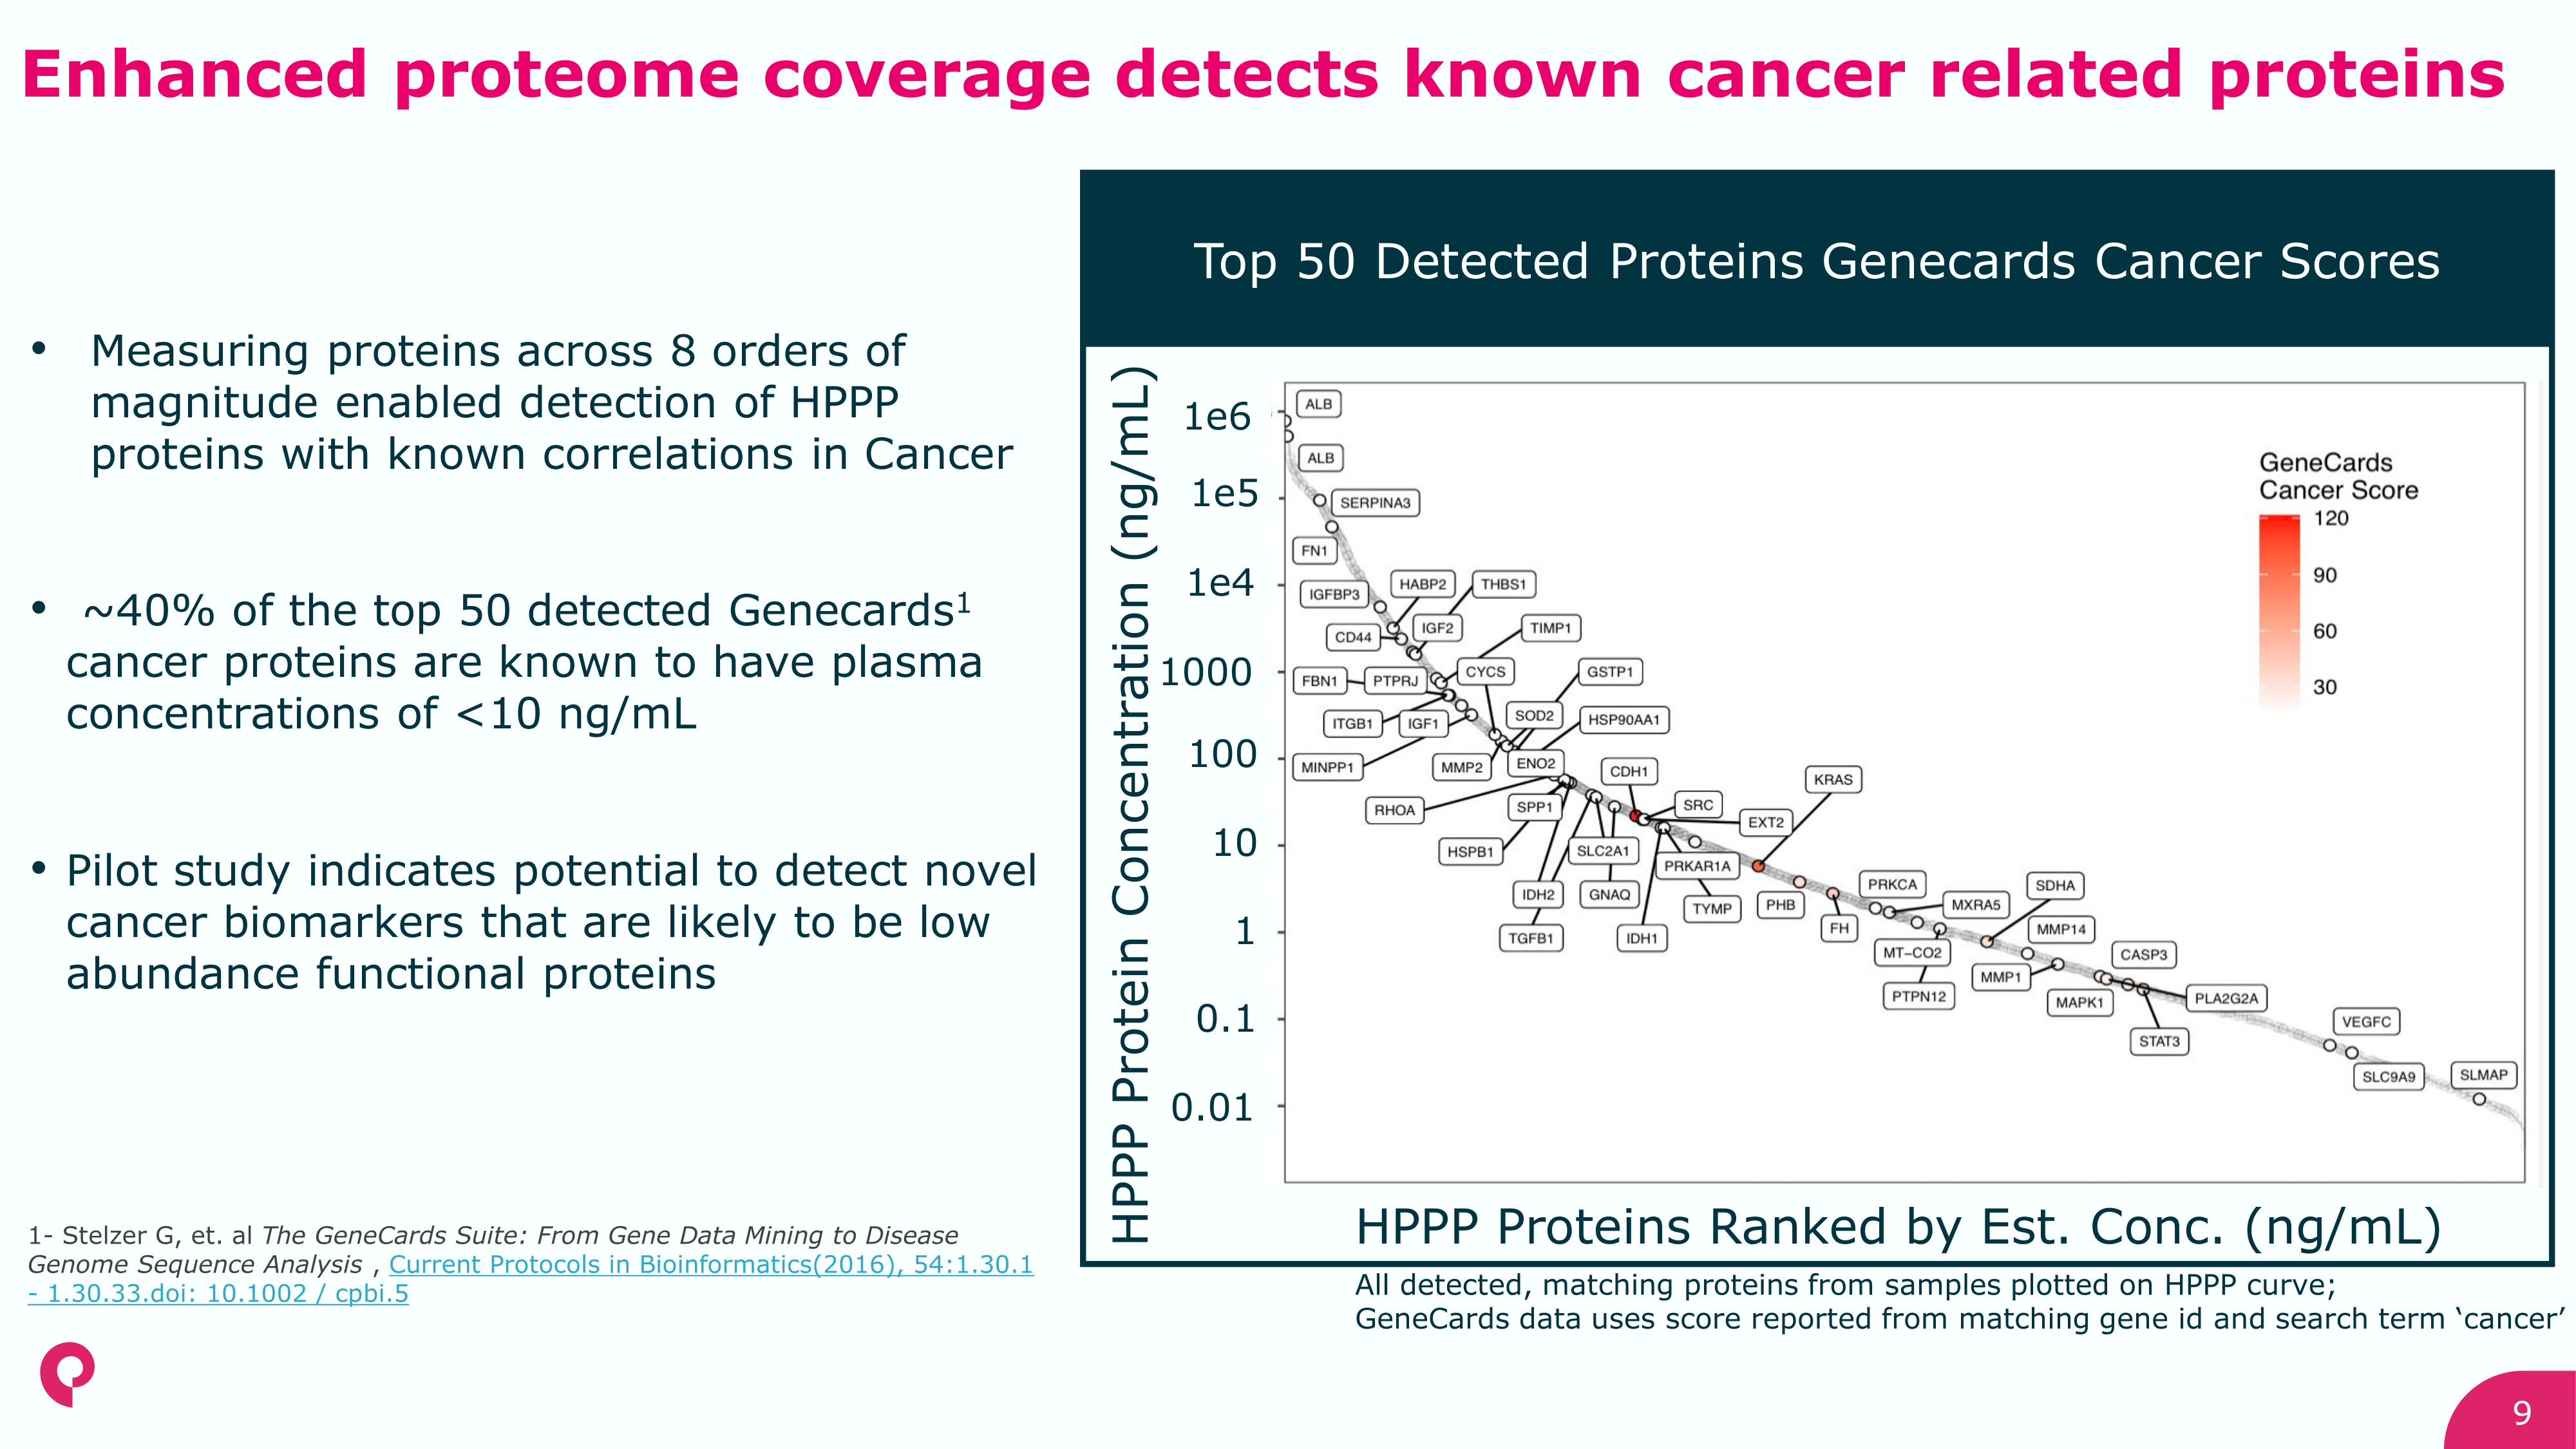 scientific poster showing large scale, deep, and unbiased proteomics profiling a sub-study of a multi-cancer cohort enabling biomarker discovery